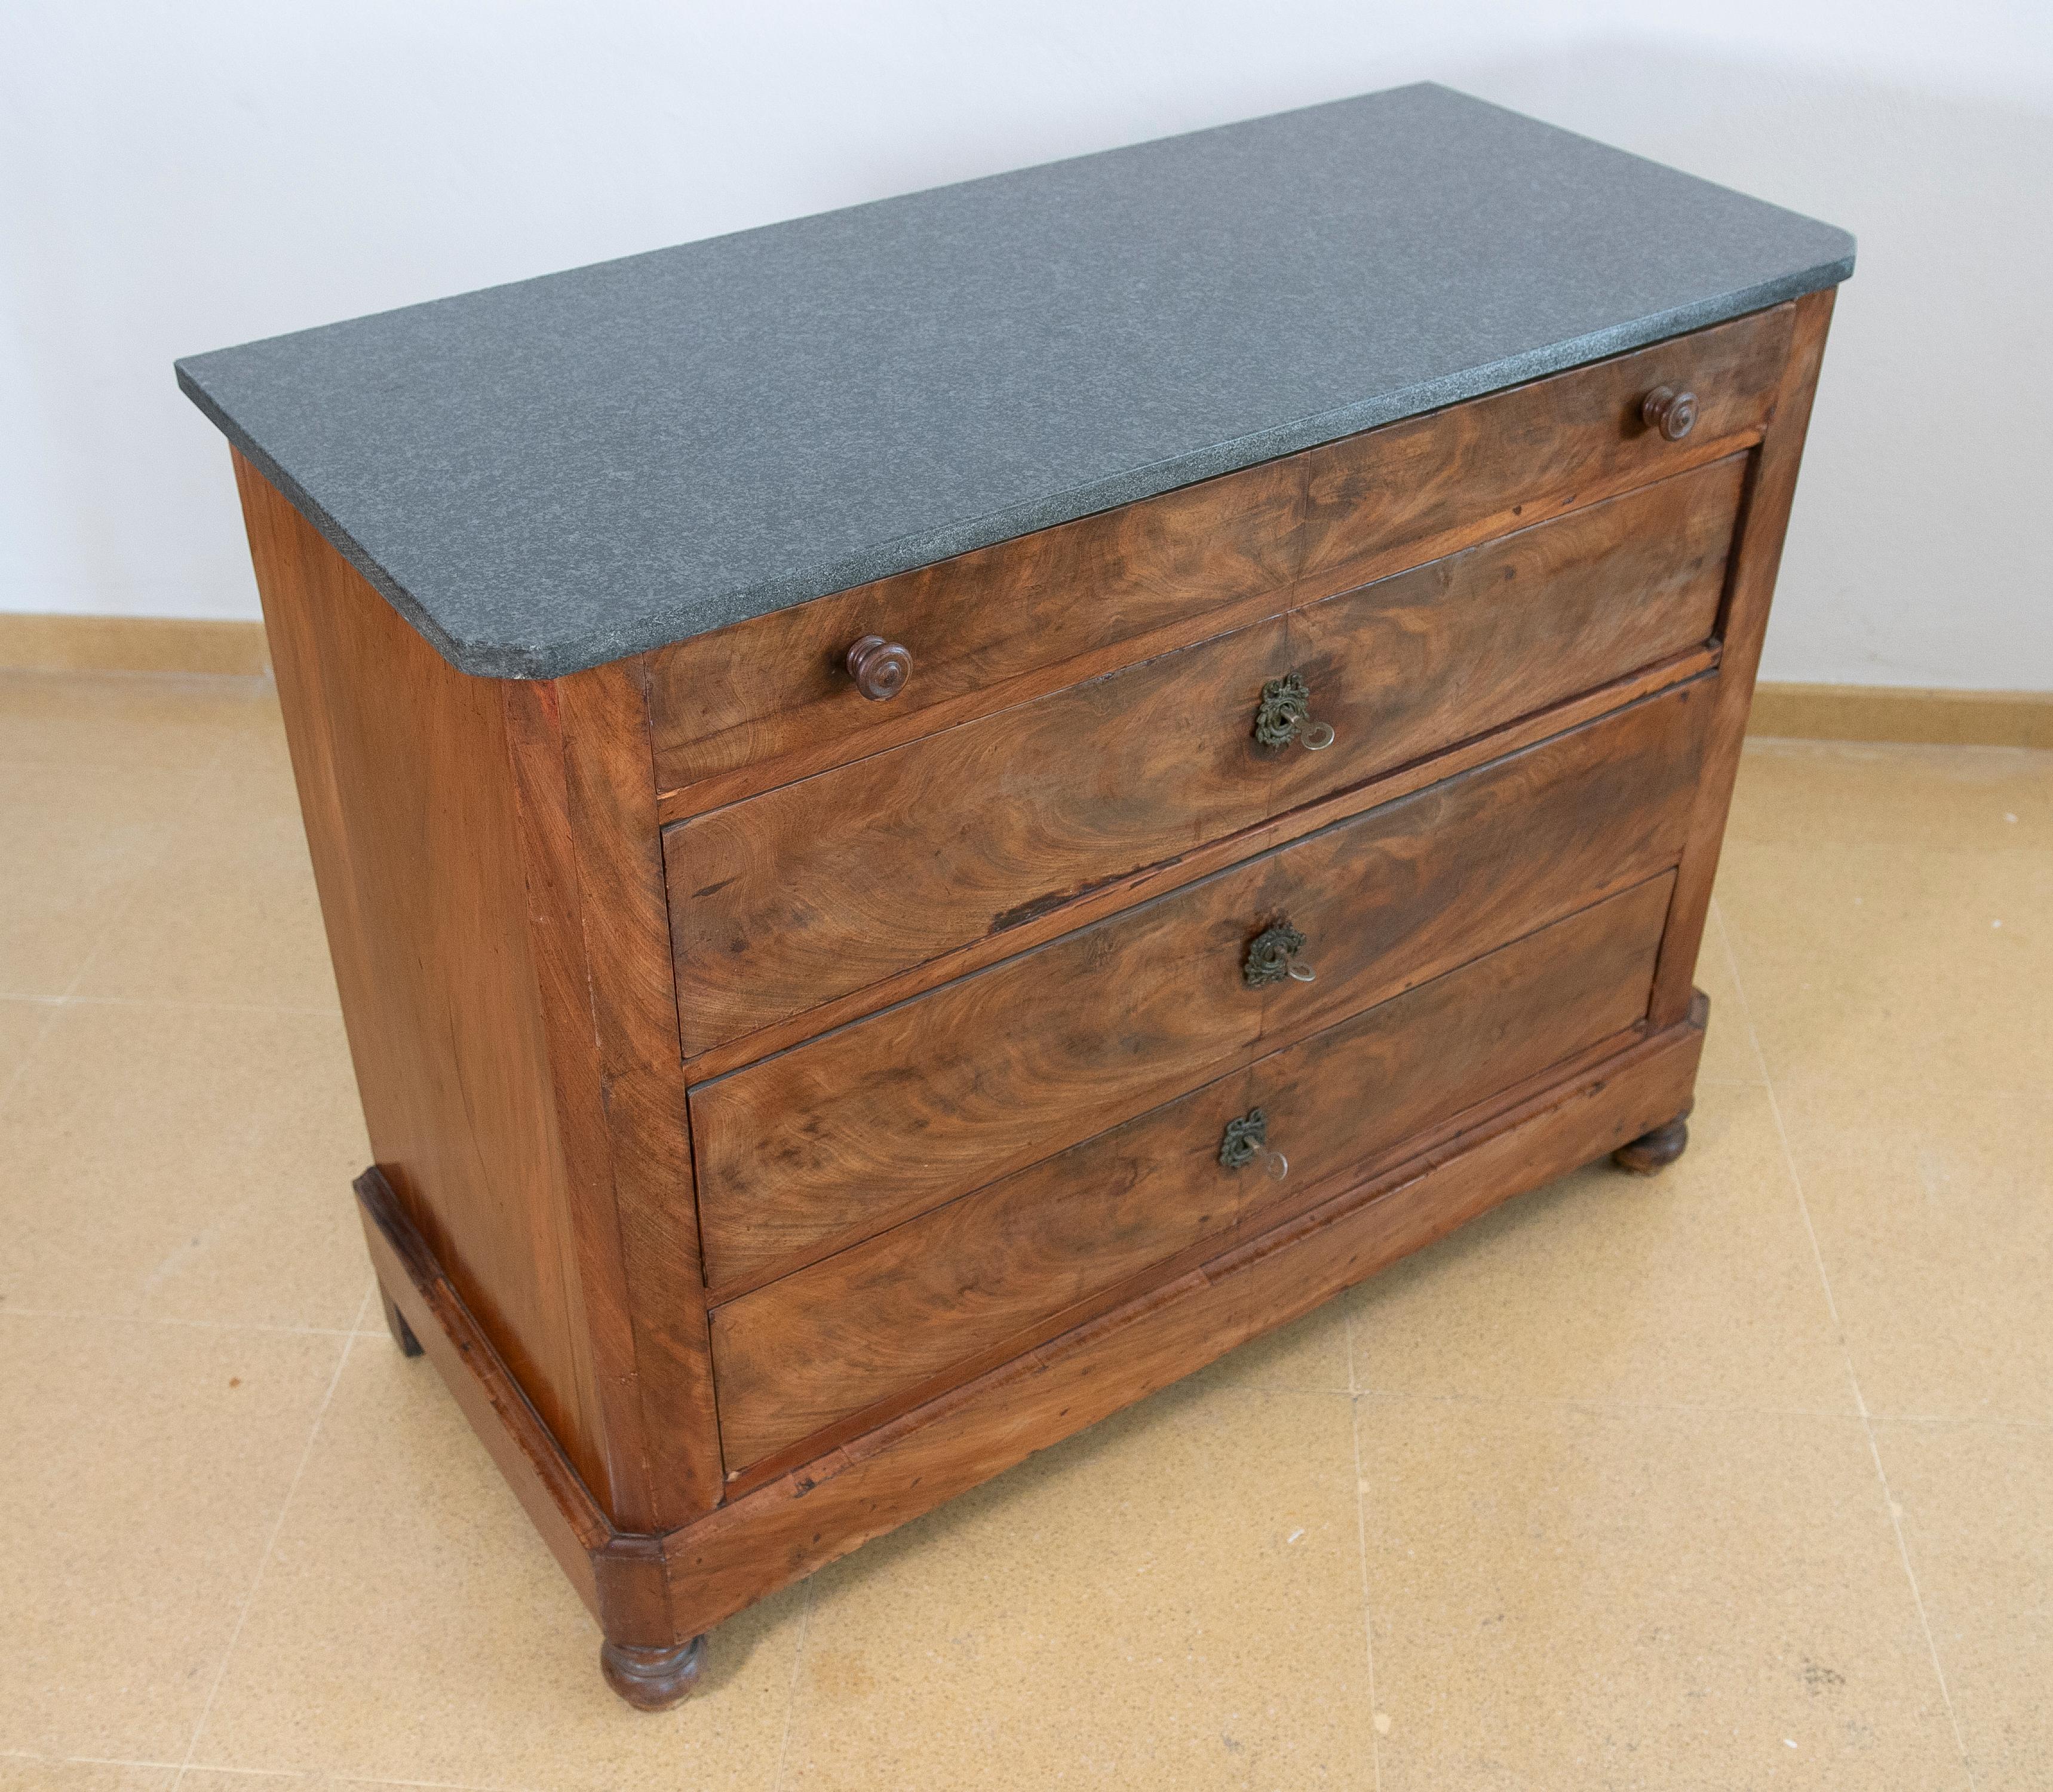 Spanish mahogany chest of drawers with five drawers and iron and wooden handles.